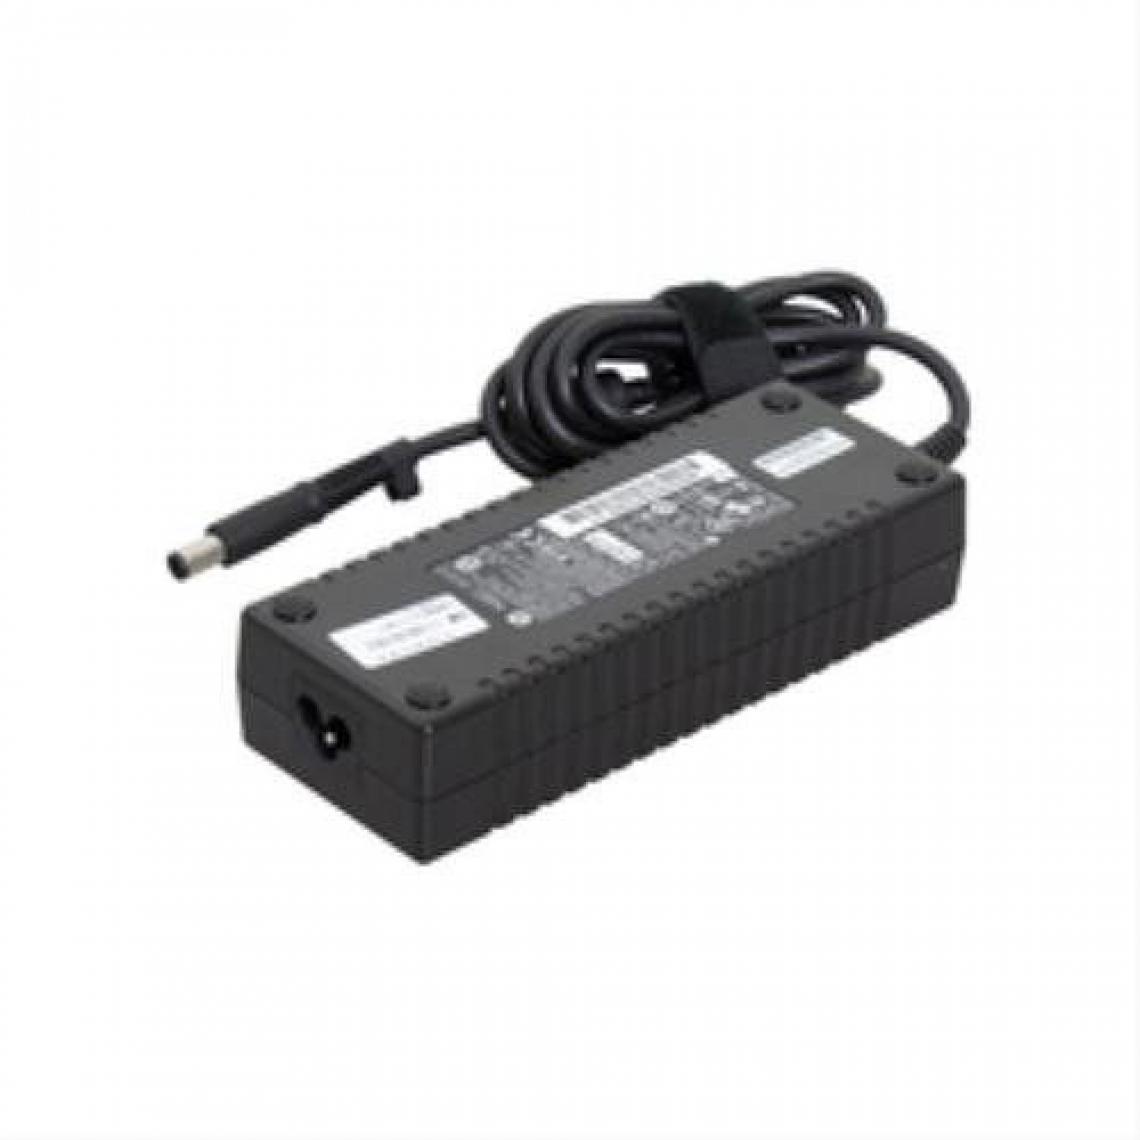 Hp - HP AC Adapter 135W Slim Ext Requires Power Cord, MBA50022 Requires Power Cord - Alimentation modulaire